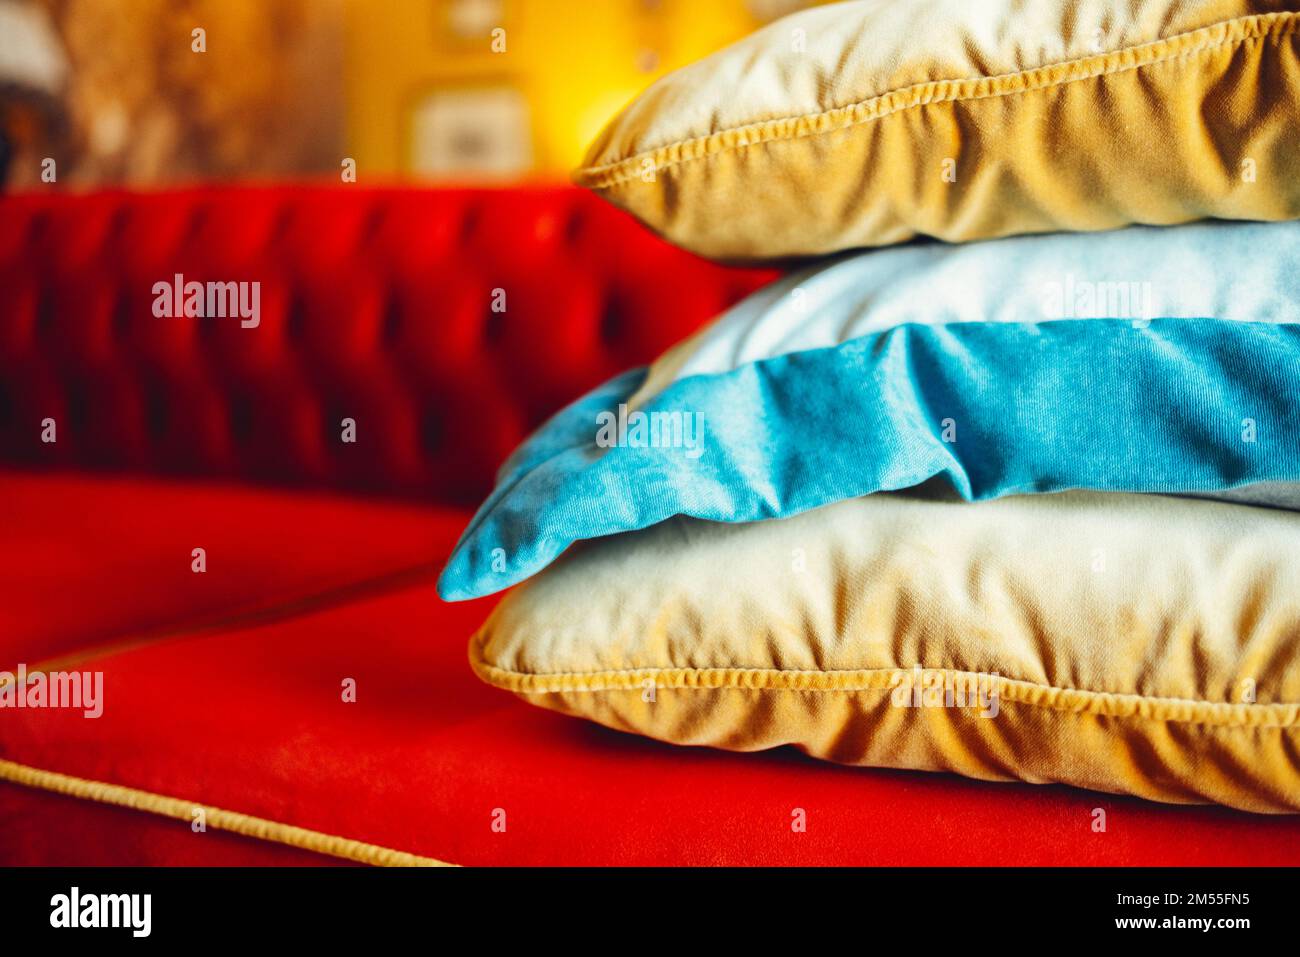 https://c8.alamy.com/comp/2M55FN5/orange-blue-and-beige-pillows-on-a-red-comfortable-sofa-in-a-chic-living-room-interior-close-up-2M55FN5.jpg